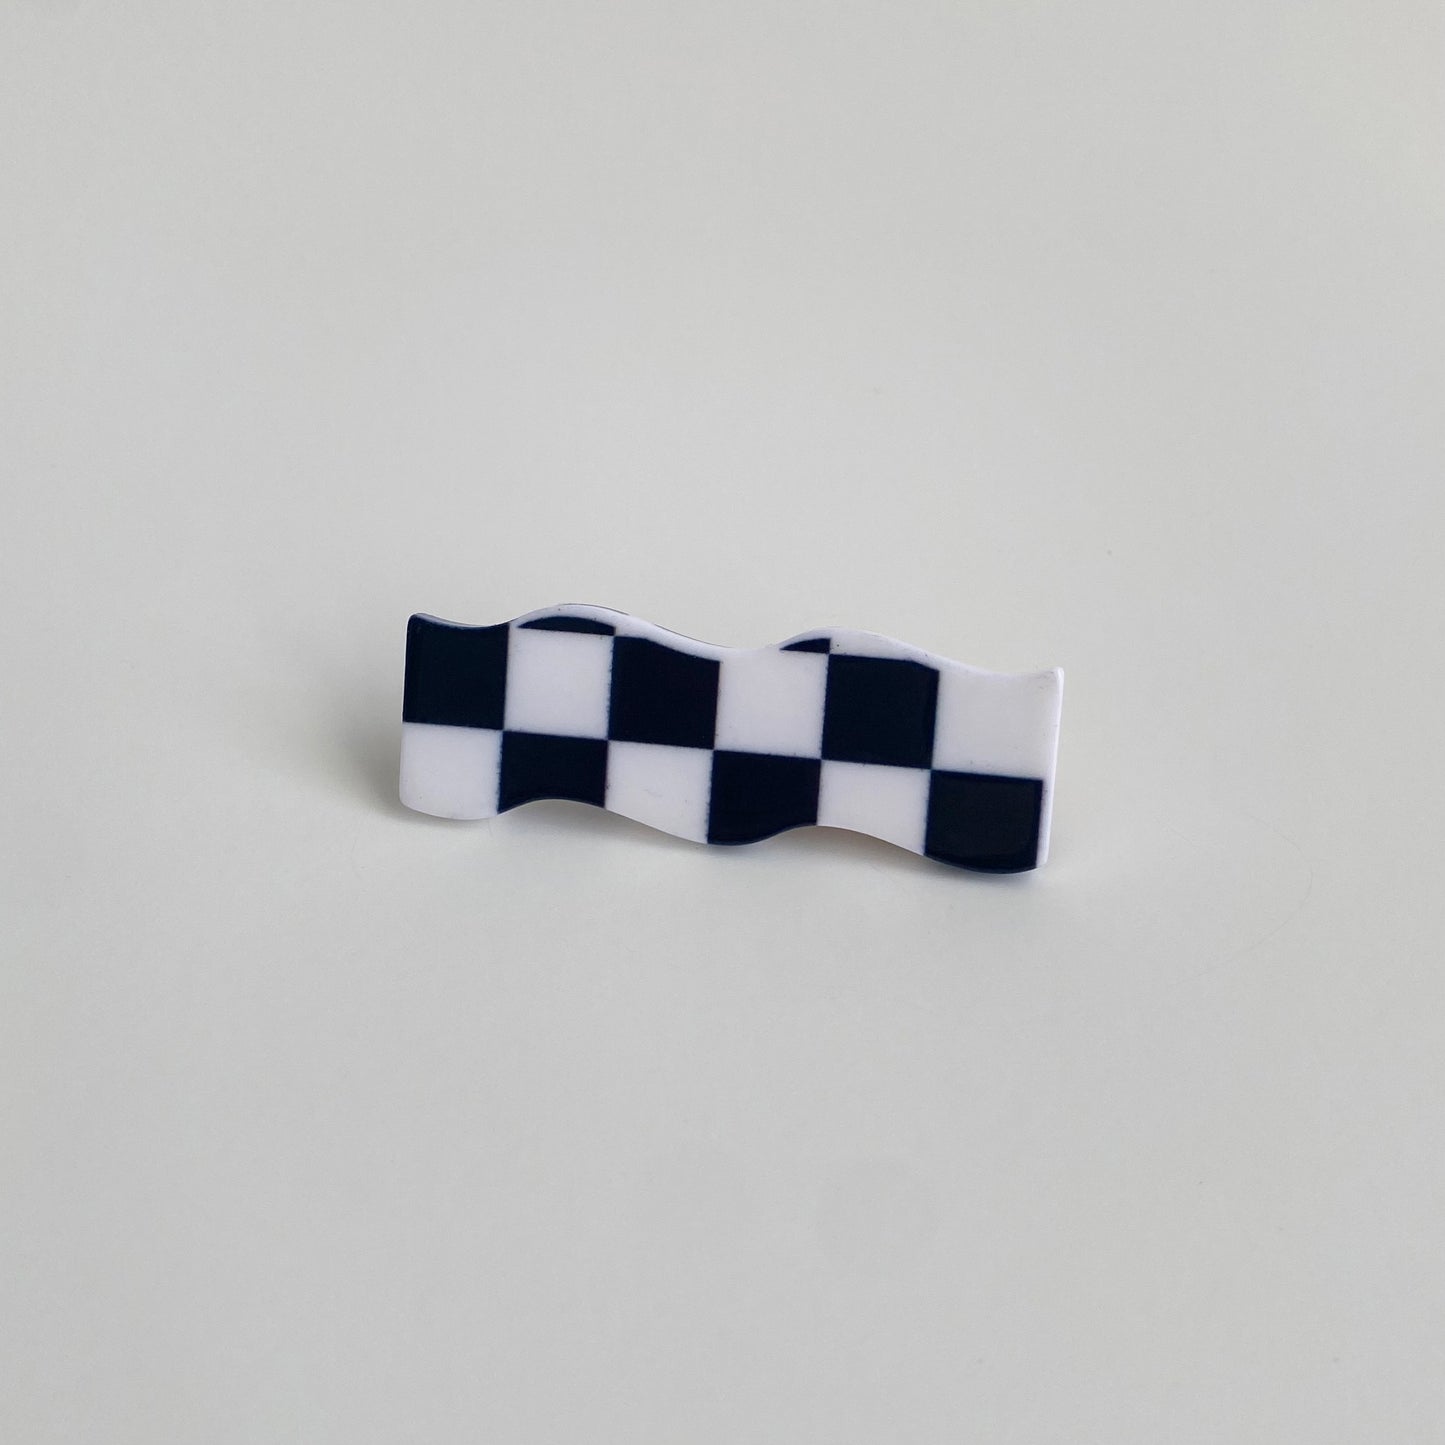 Checkered hairpin in black checkered wave